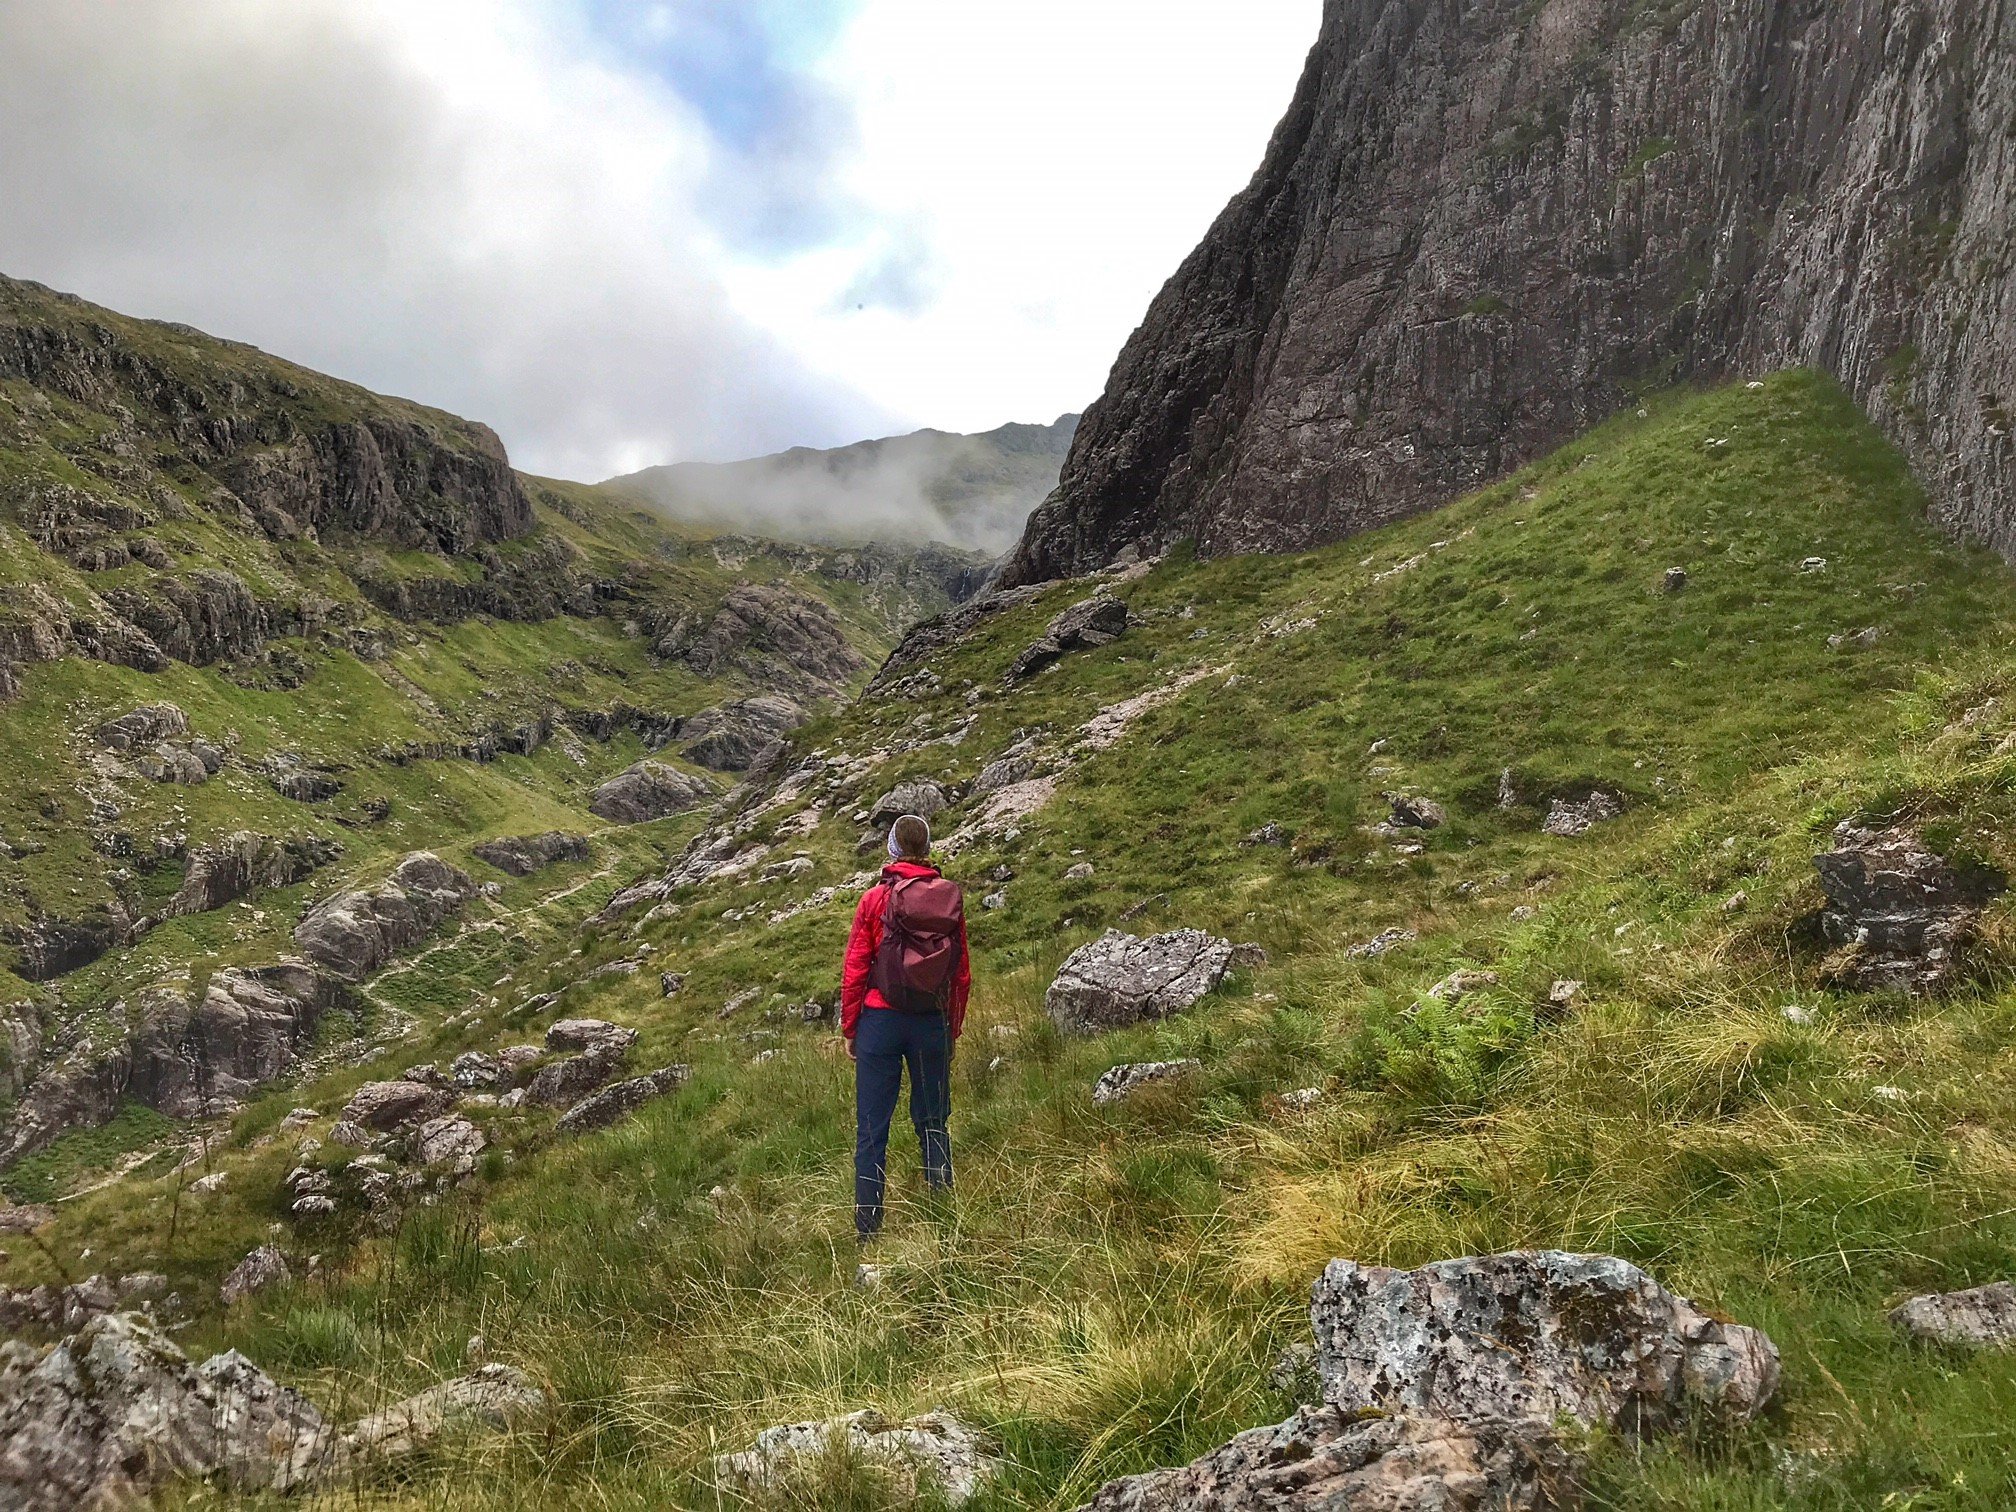 Anna stands in the centre of some hills in Berghaus gear